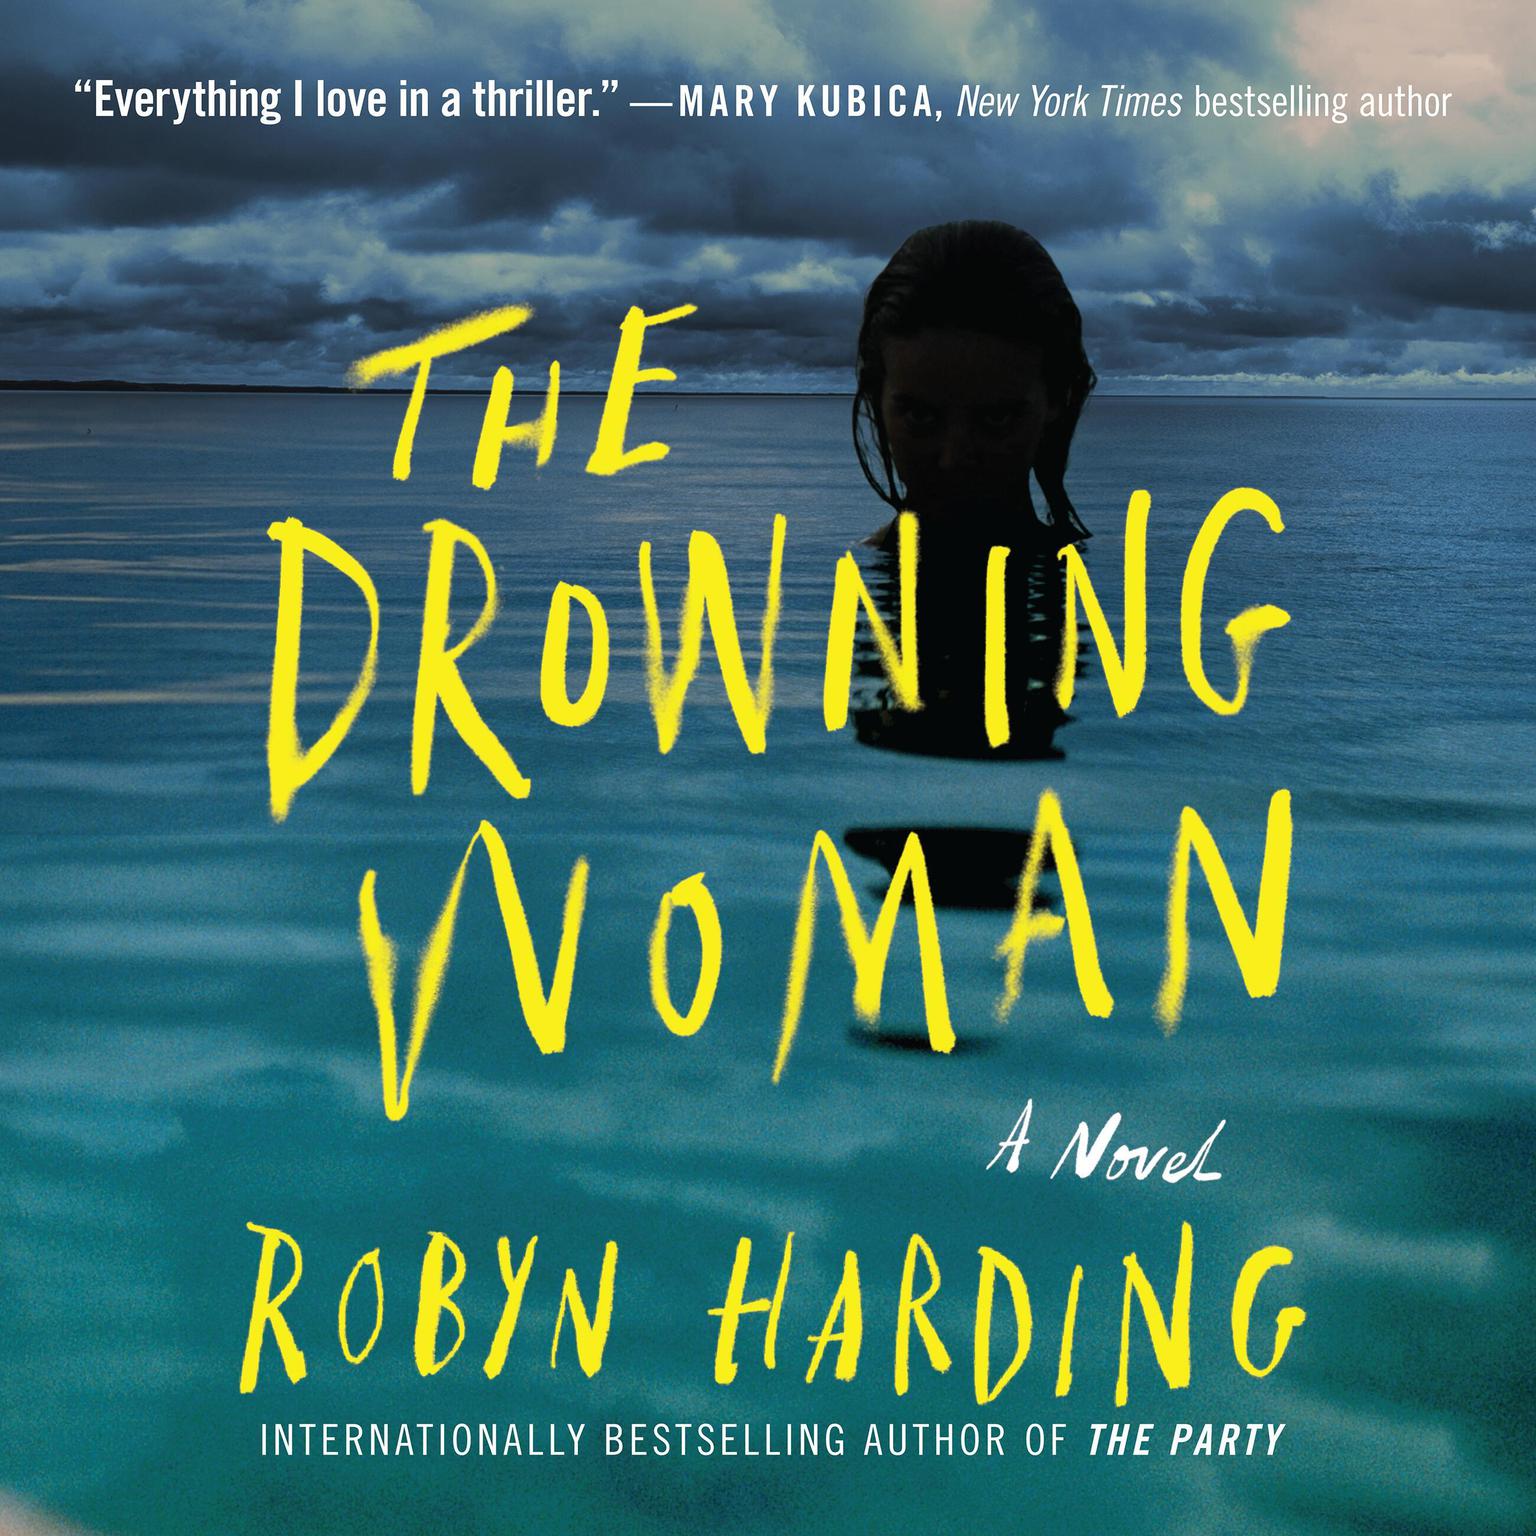 The Drowning Woman Audiobook, by Robyn Harding